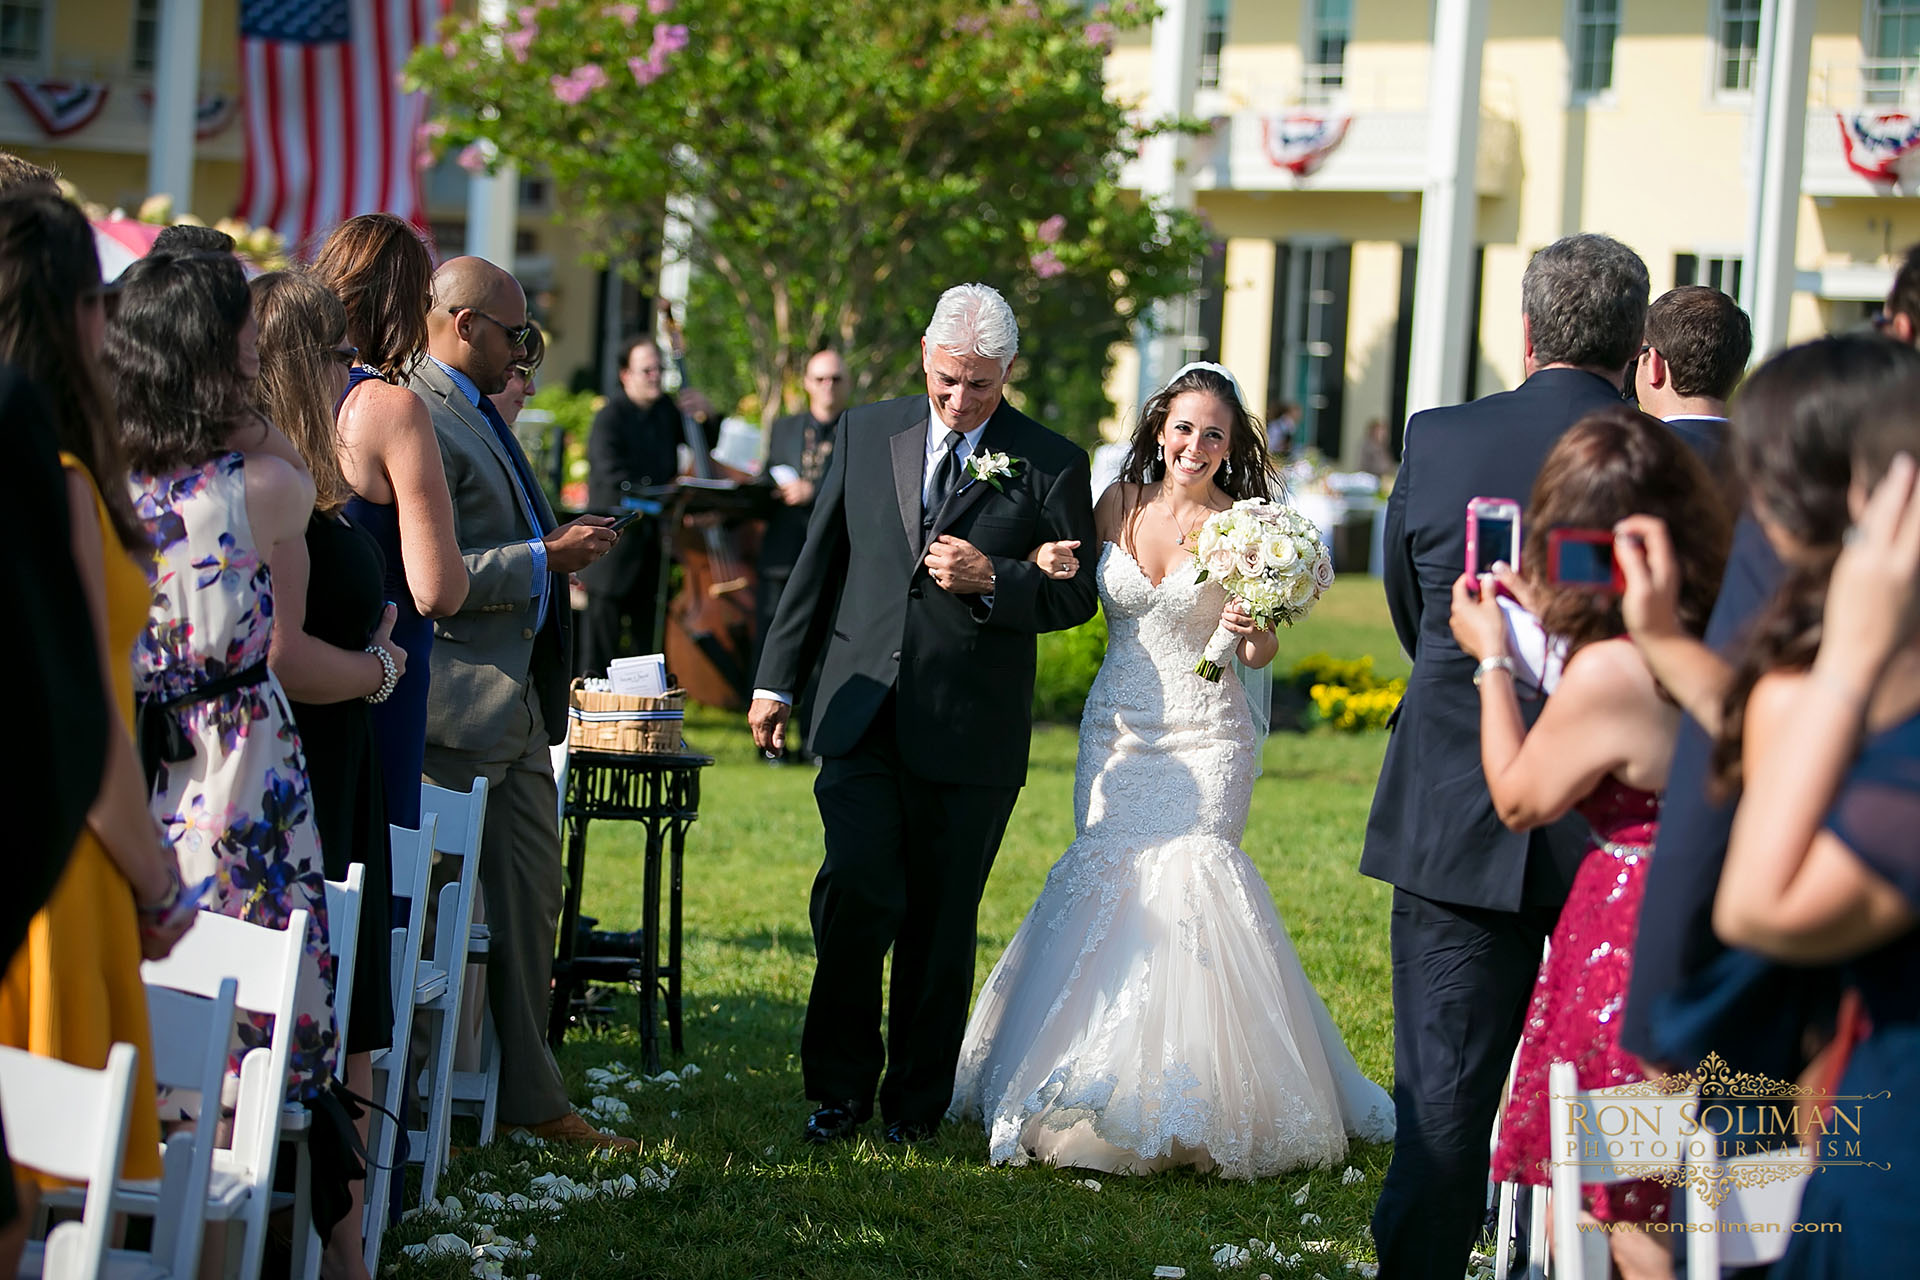 CONGRESS HALL WEDDING in cape may, new jersey